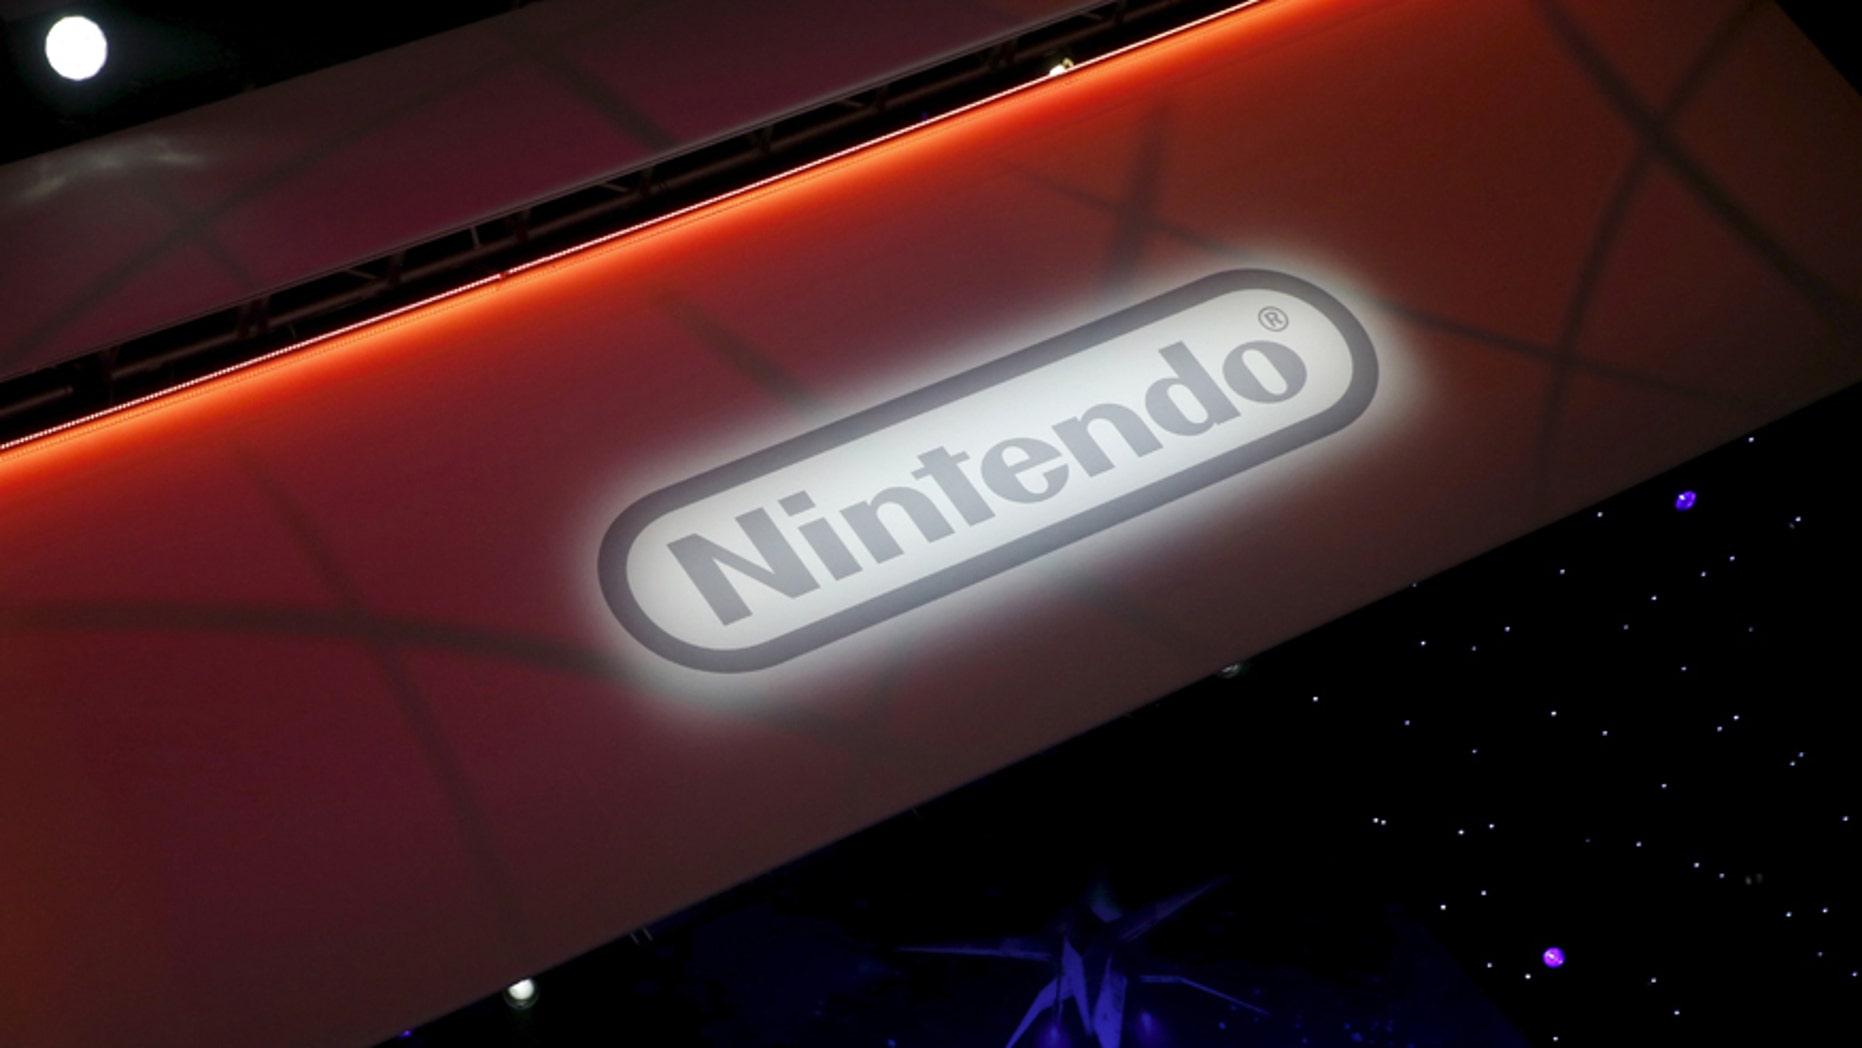 Nintendo says ‘Super Smash Bros’ is its fastest-selling game ever